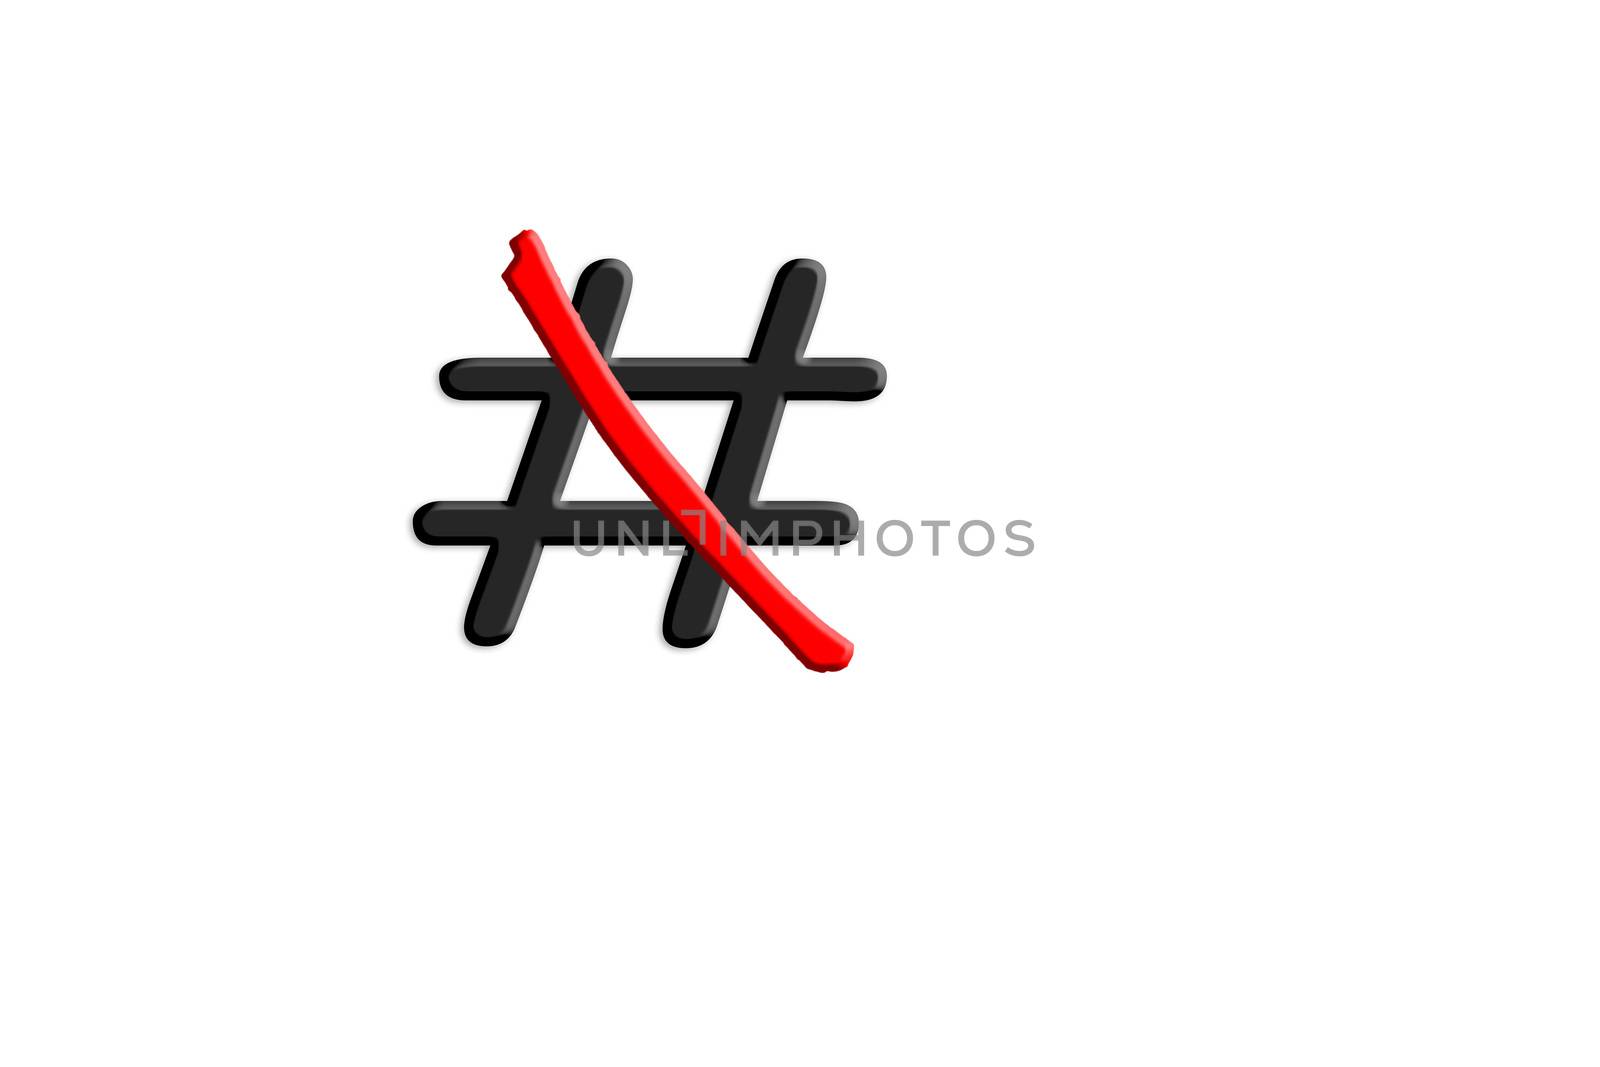 Sign Hashtag # red crossed out on white background.